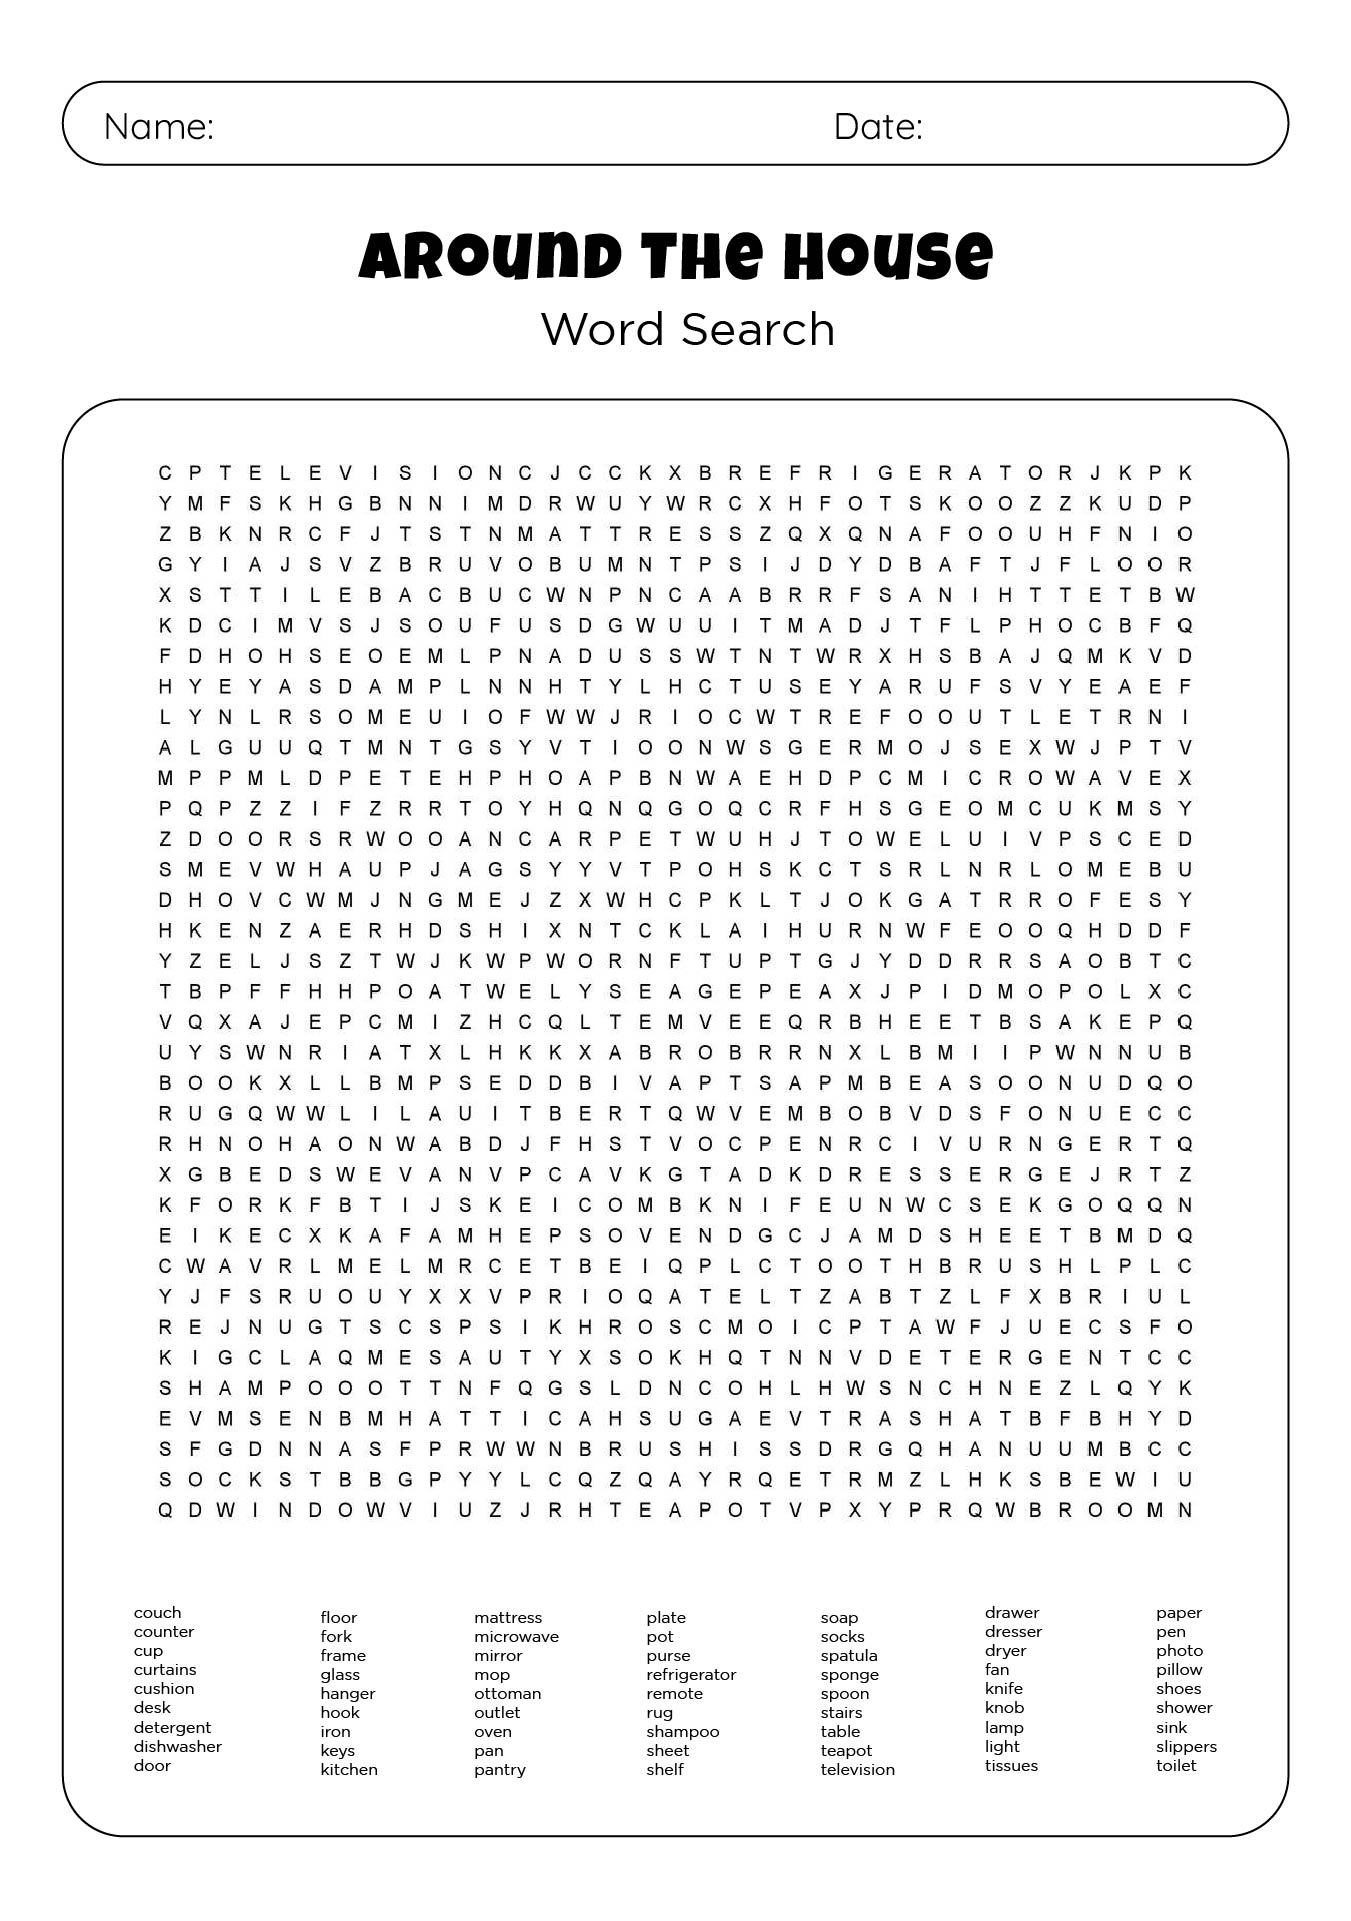 printable-difficult-word-search